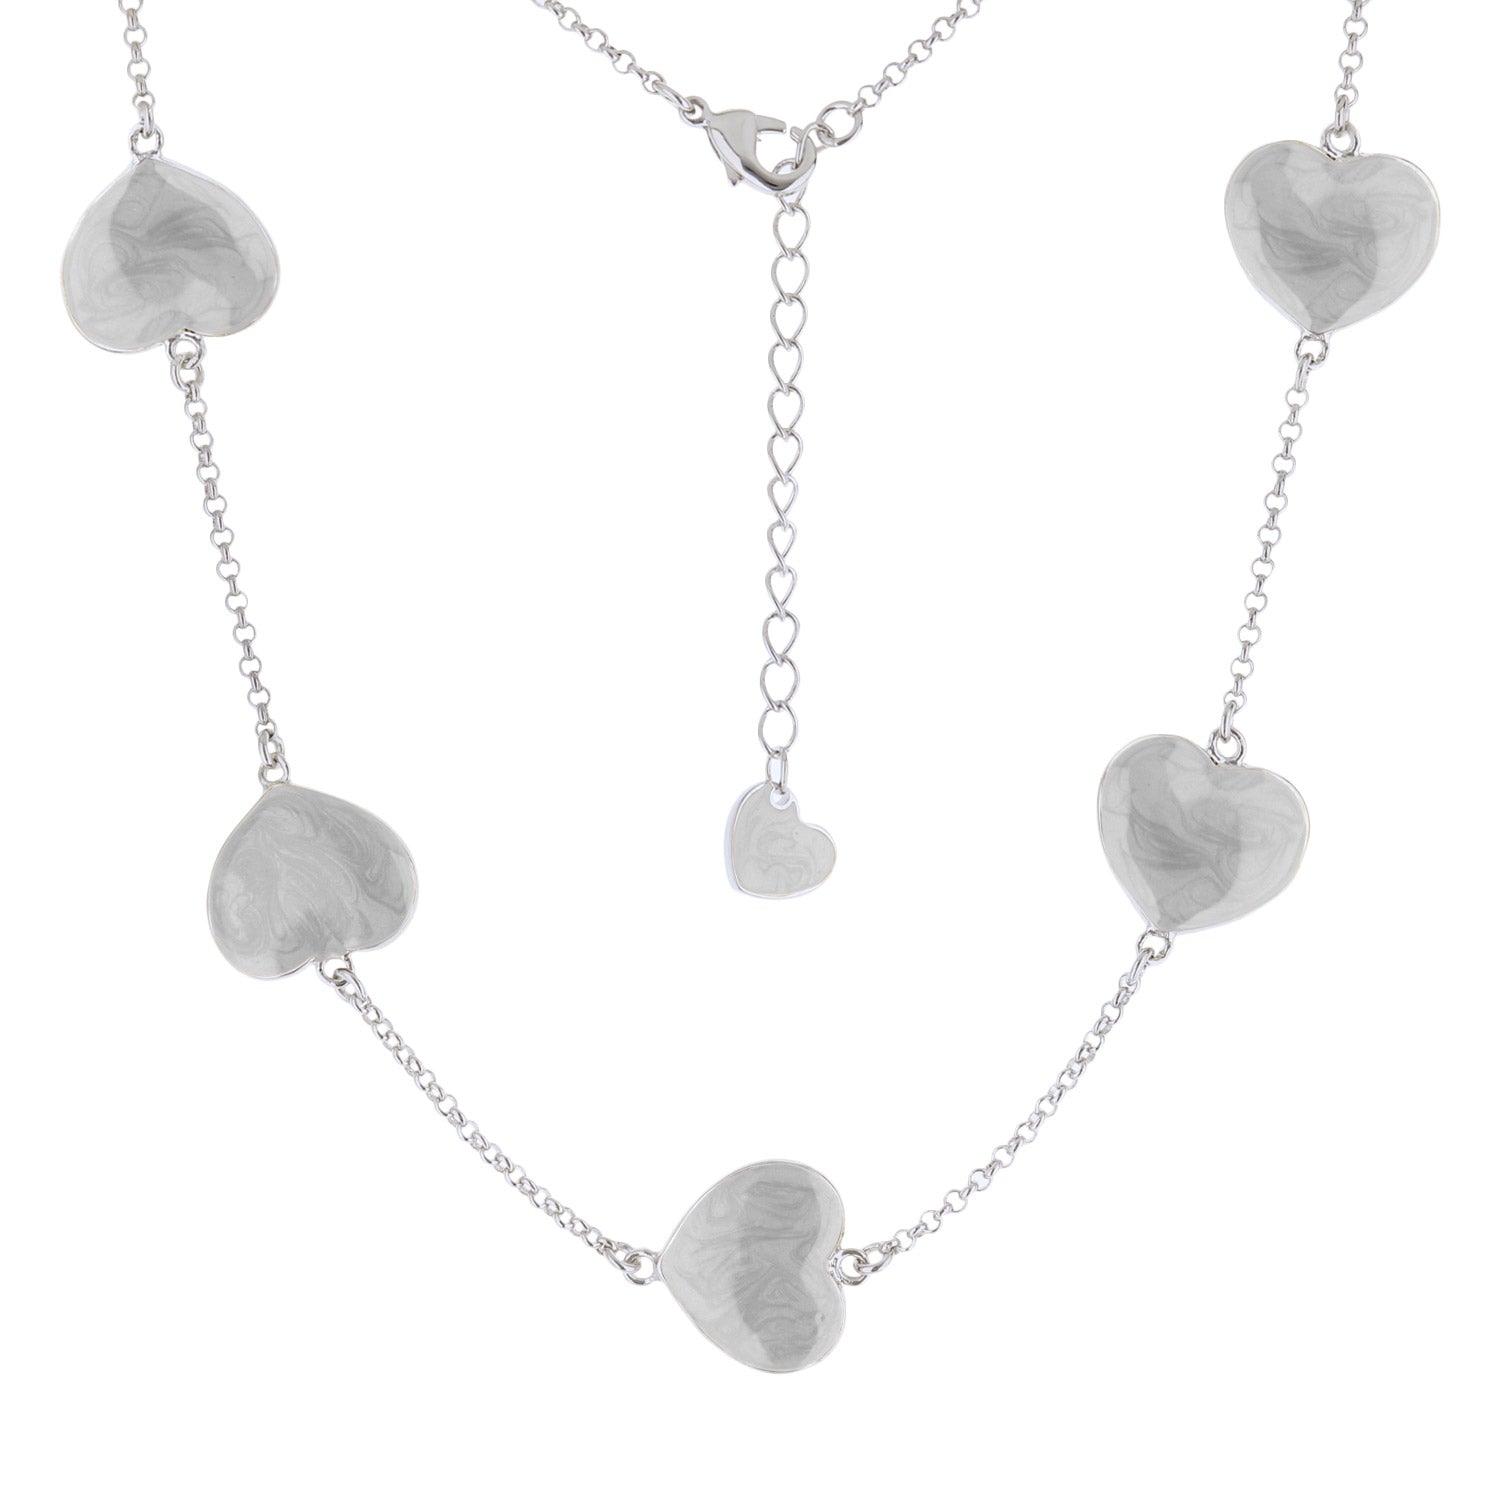 Lots of Love Necklace